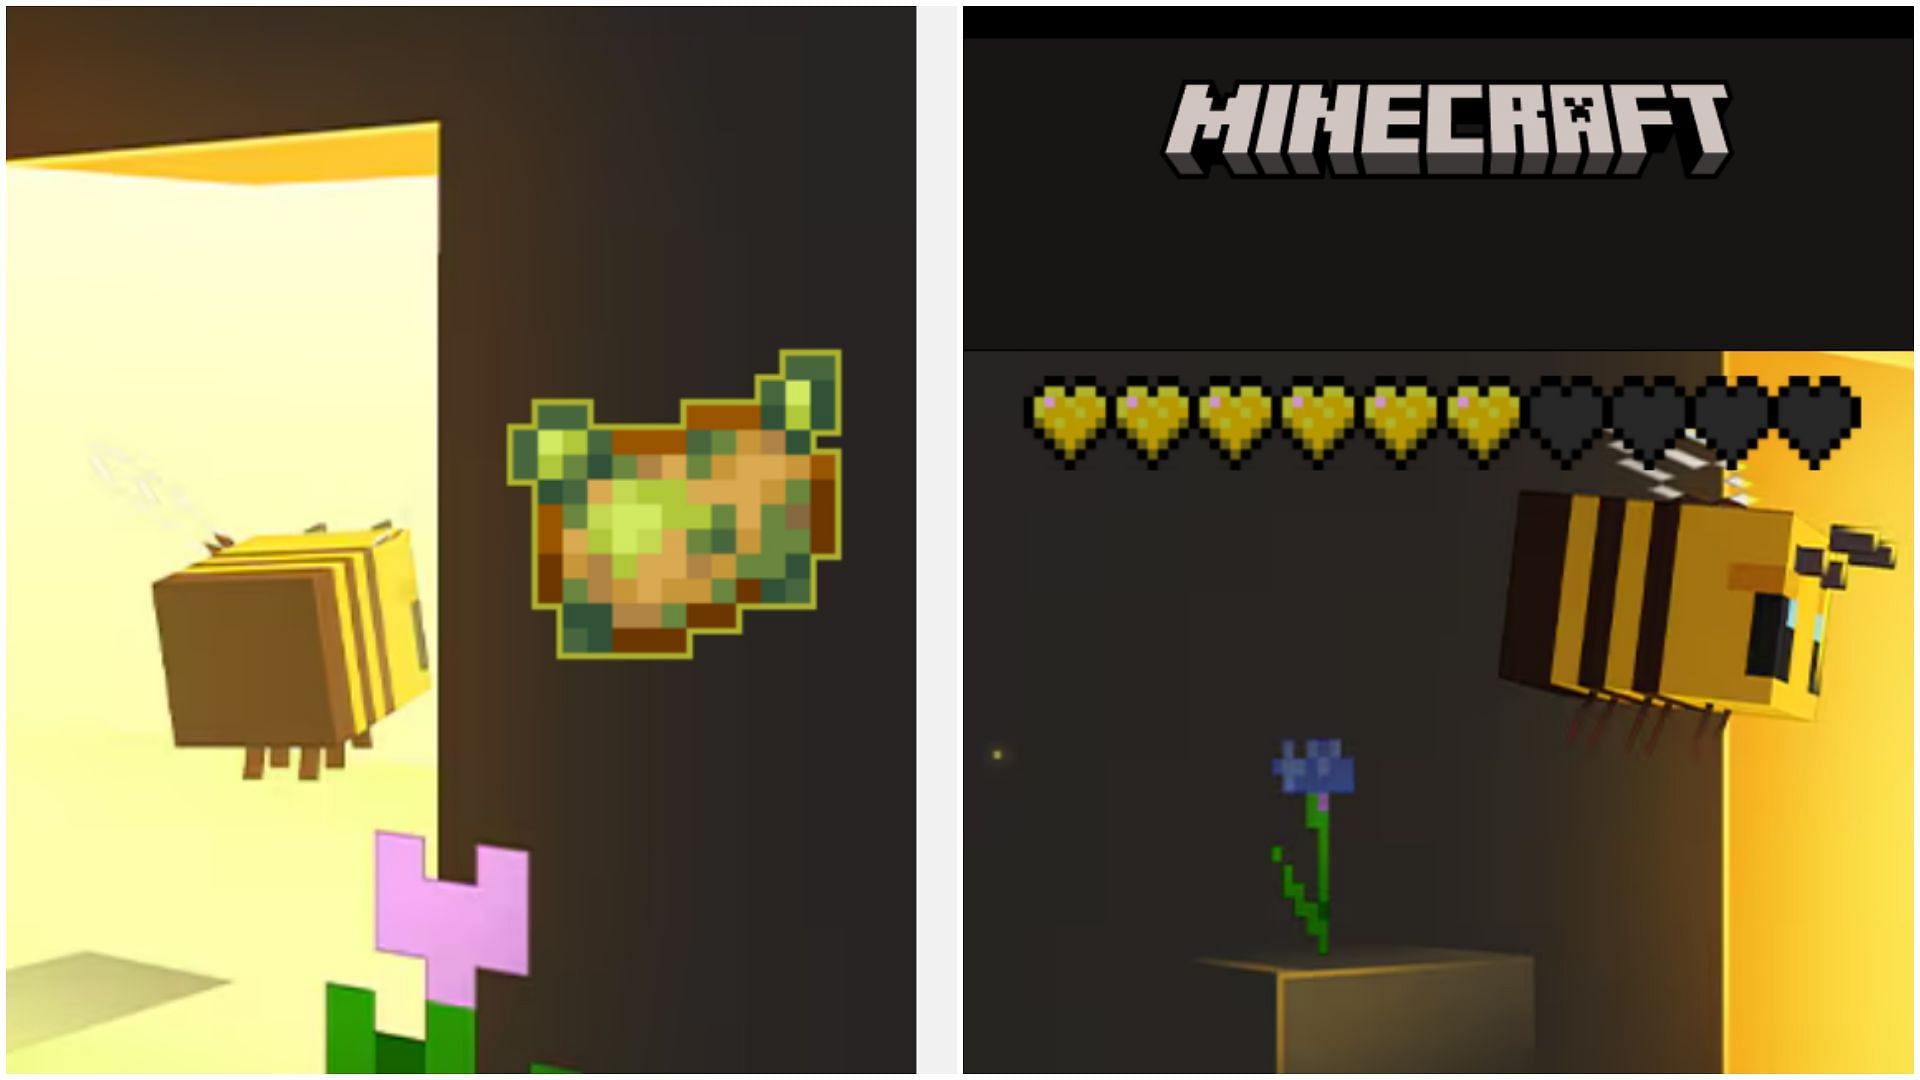 Players can tap on poisonous potatoes to eat them and reduce their health bar on the website. (Image via Mojang Studios)